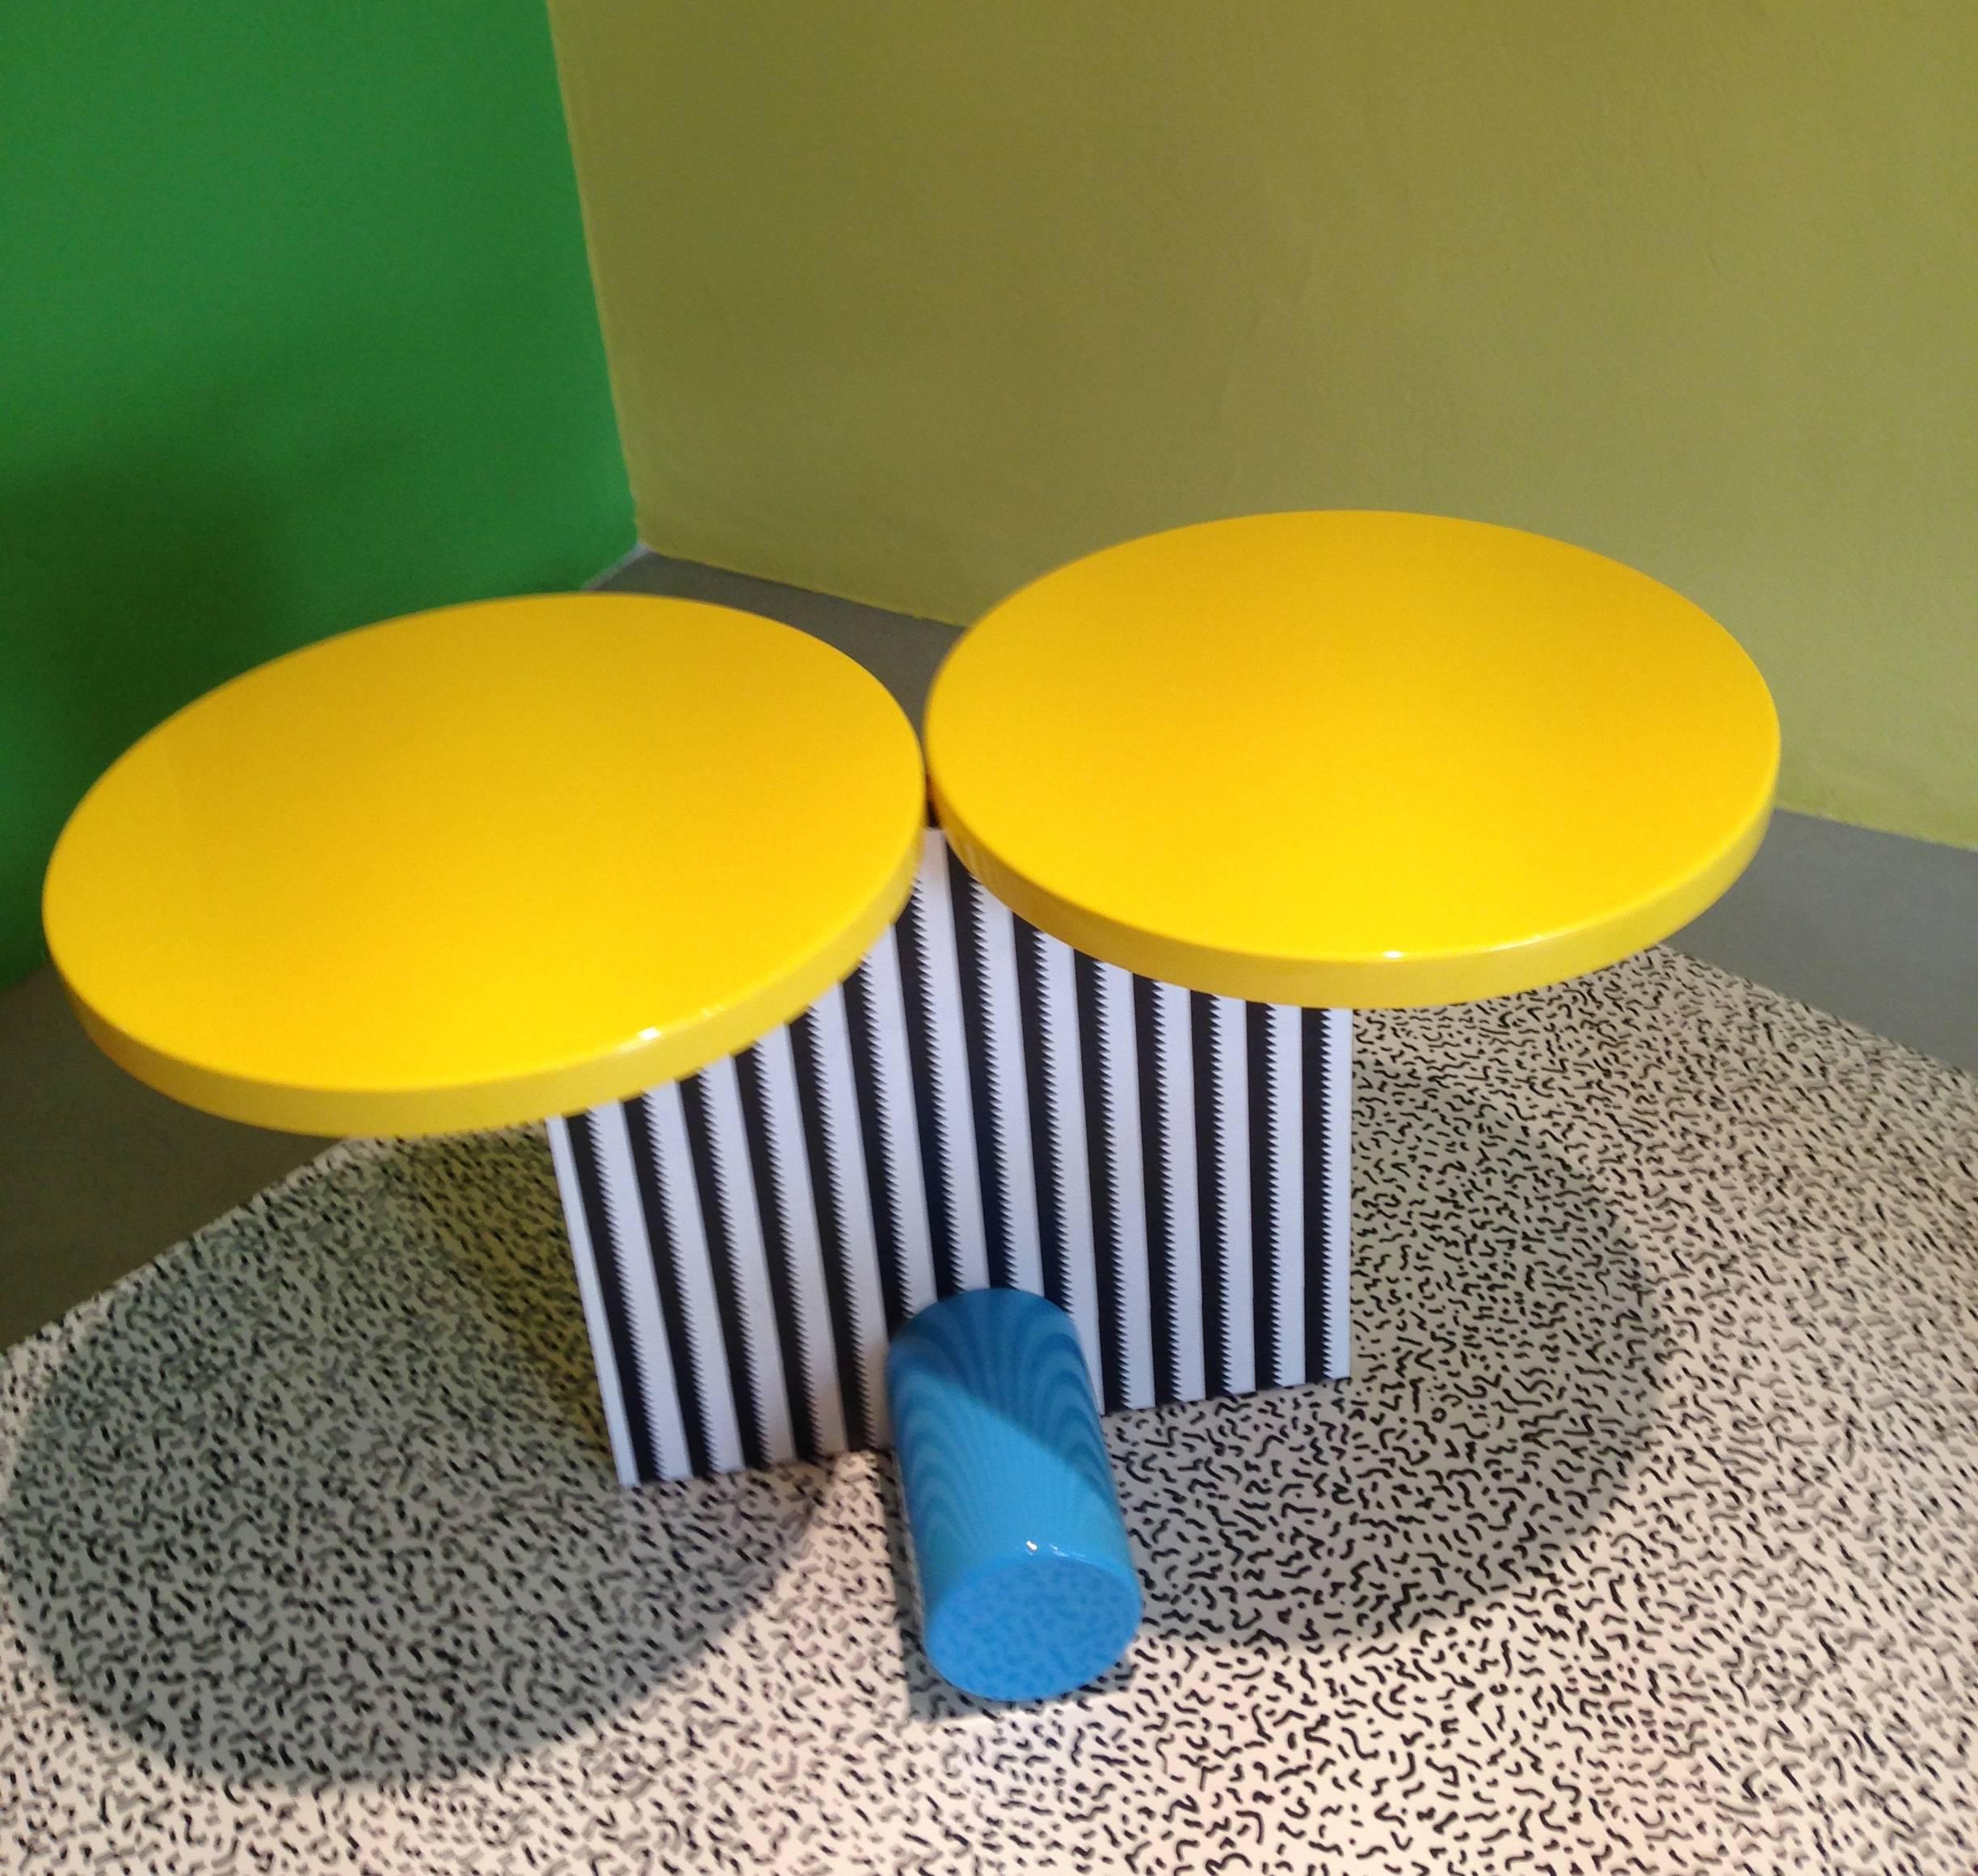 Another quirky anthropomorphic table by Michele De Lucchi, early Memphis trailblazer (looks a little like "Mickey", don't it??).

When you think of Memphis, this is truly it!! Bright lacquered colors and the De Lucchi-designed Abet plastic